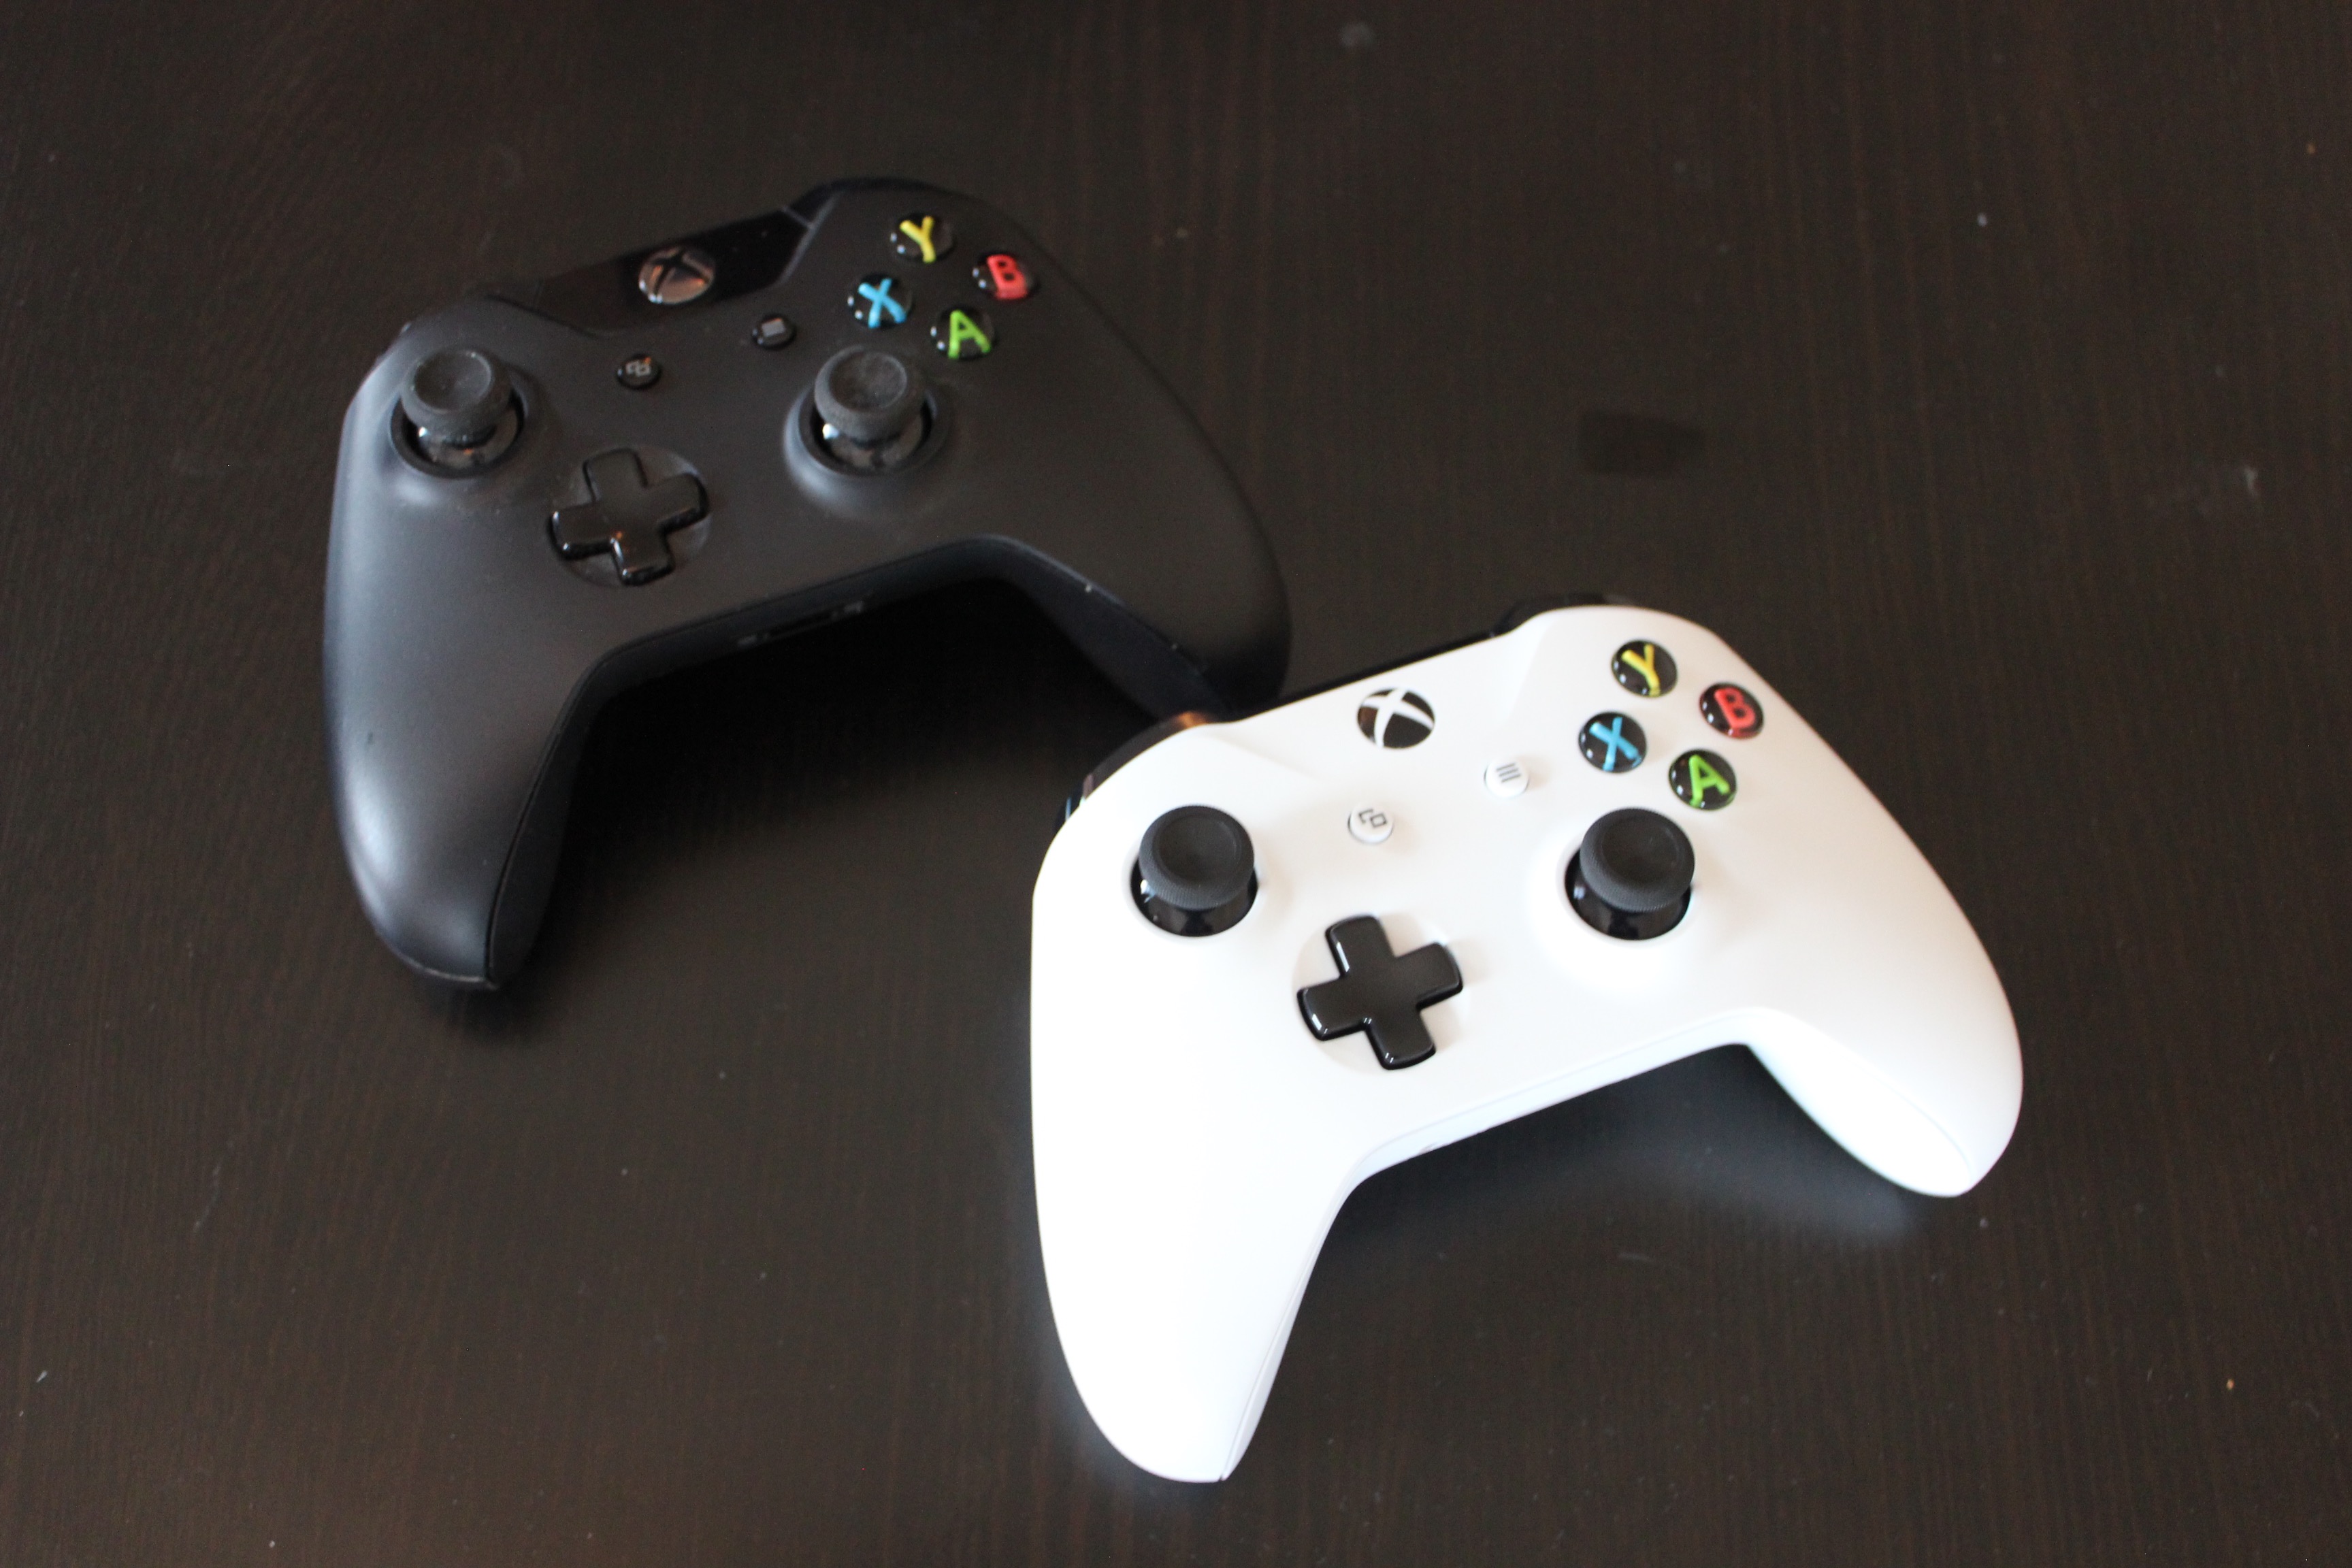 Xbox One games with keyboard and mouse support are coming soon – BGR